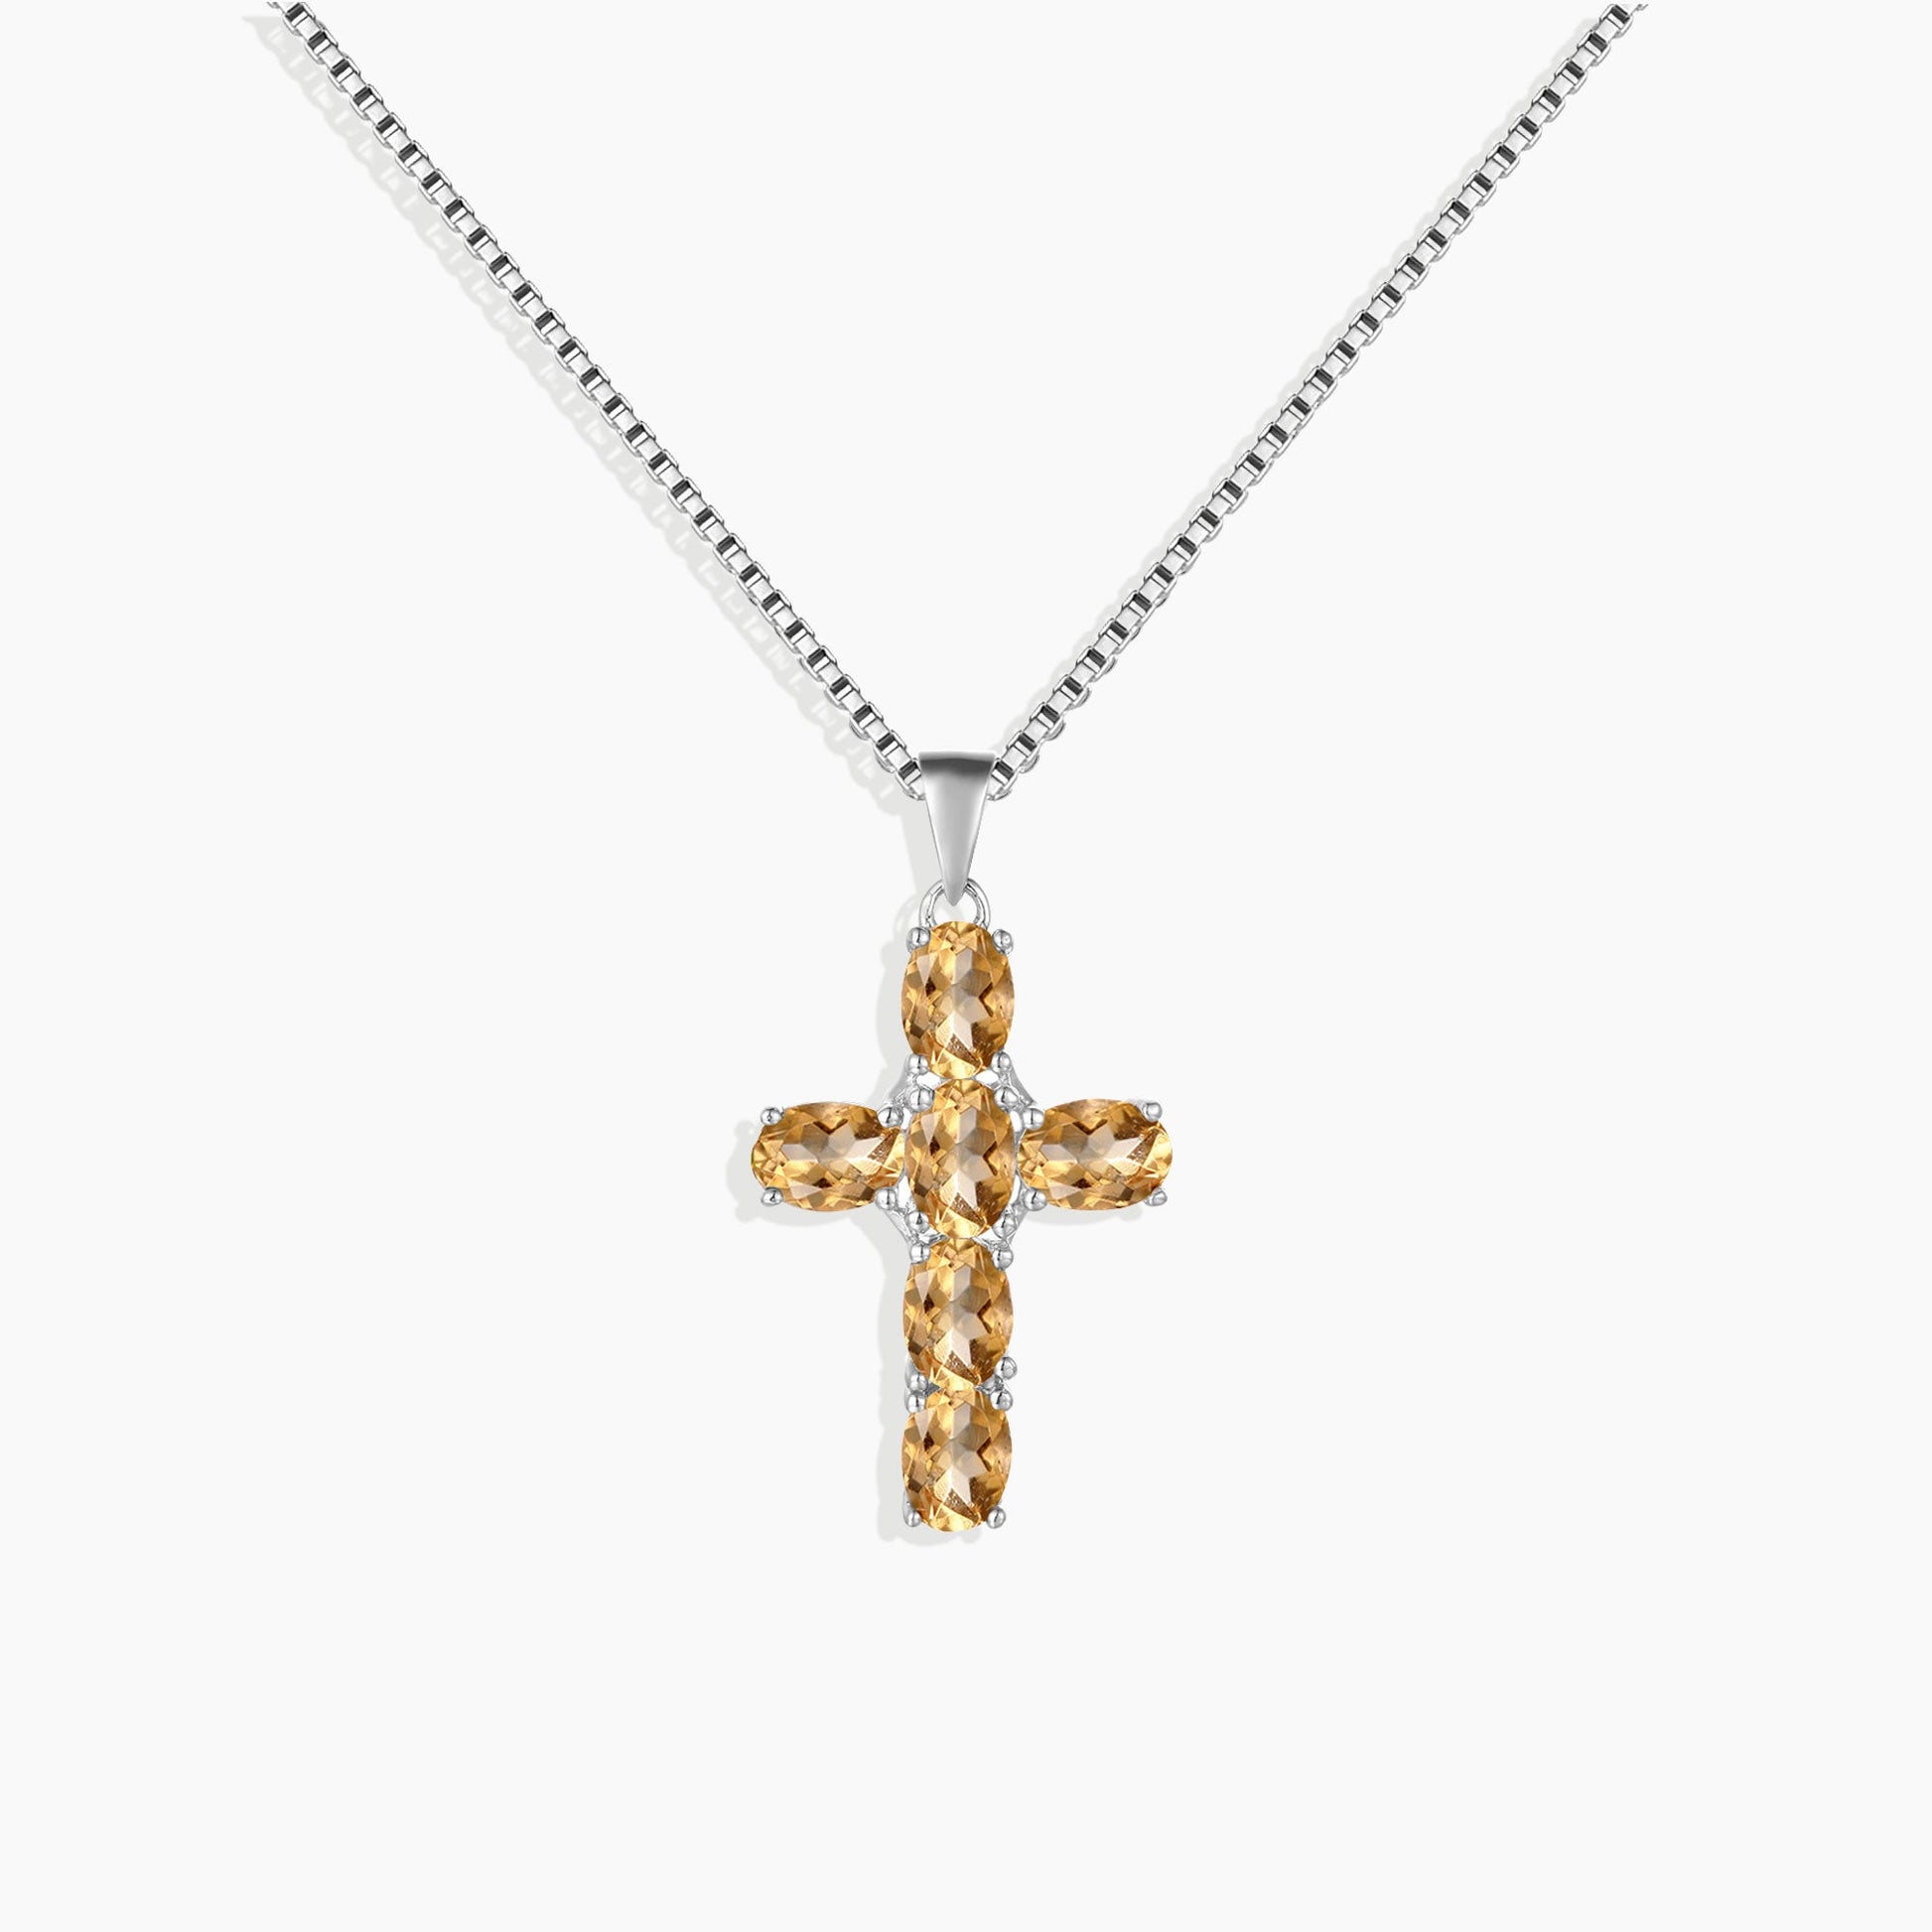  Sterling Silver Cross Necklace with Citrine Gemstone - Elegant Religious Jewelry